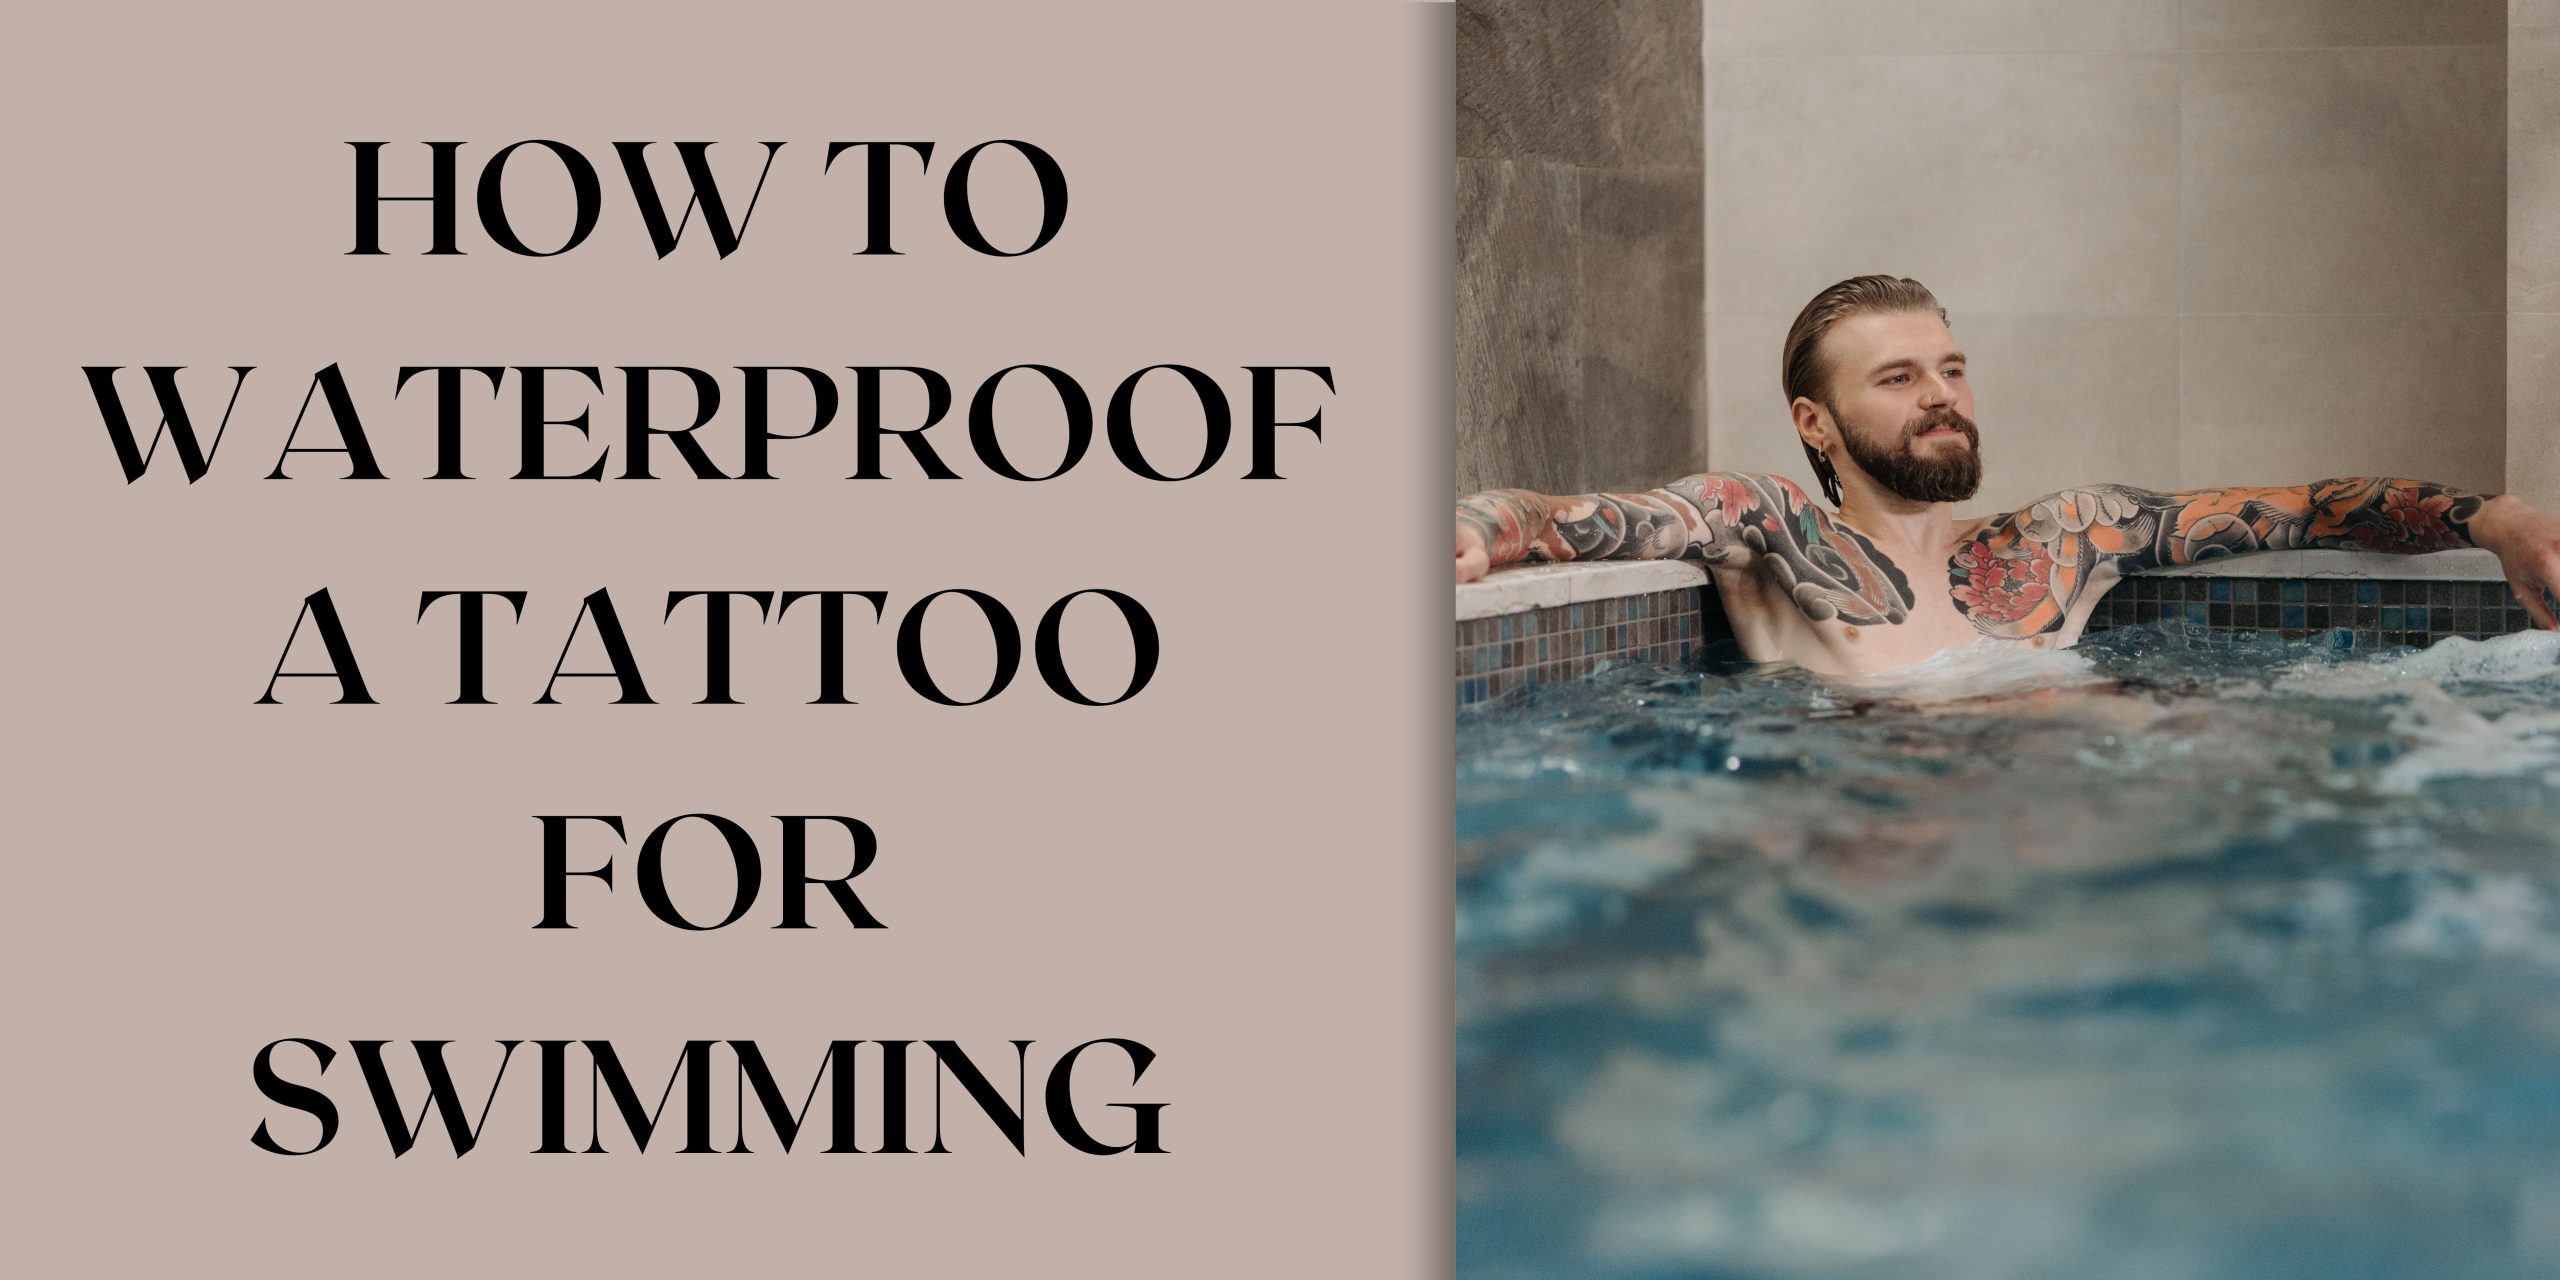 How To Waterproof A Tattoo For Swimming